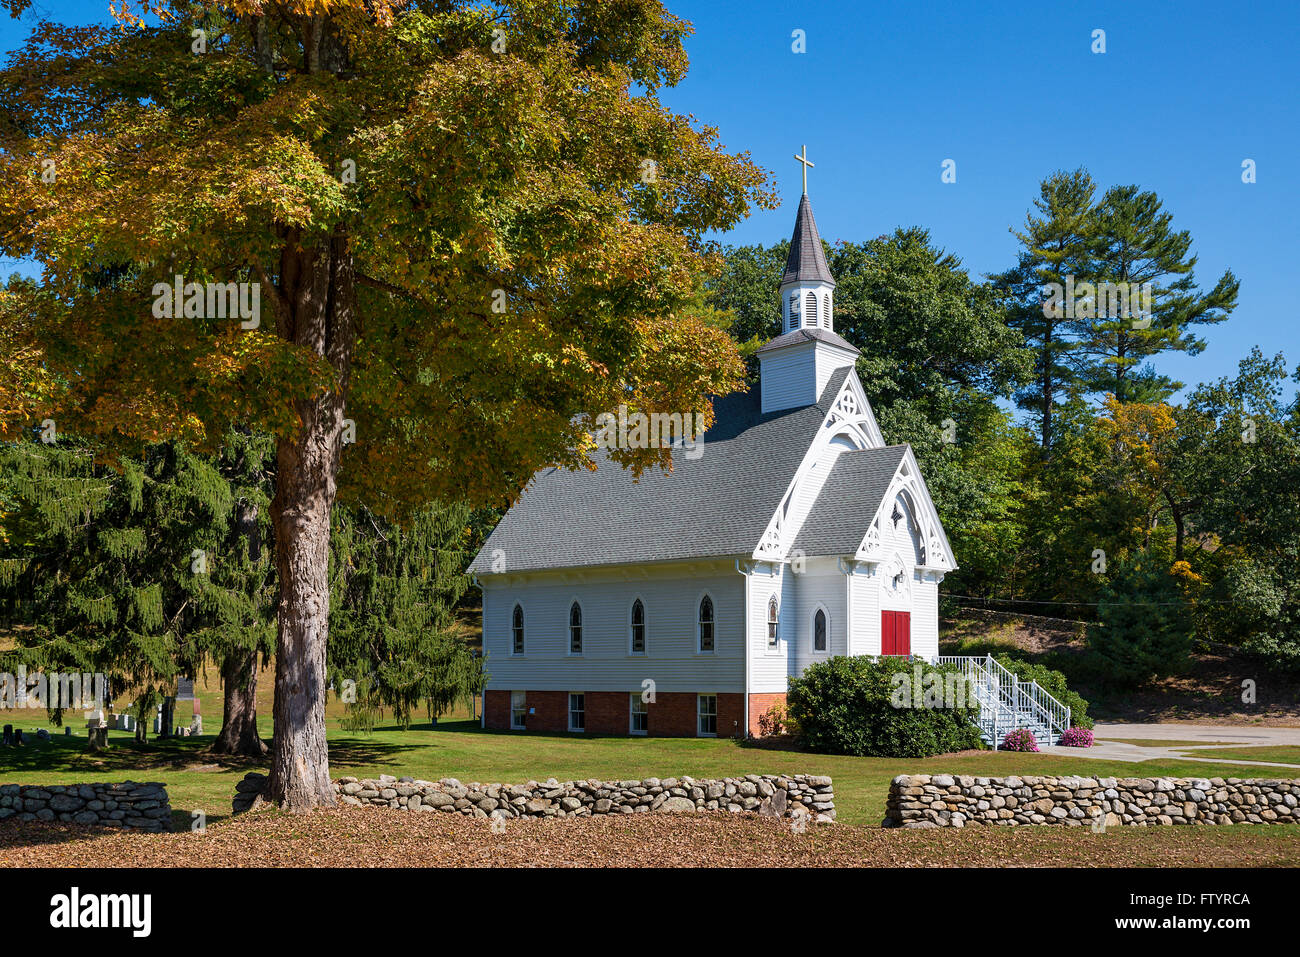 Country church, West Cornwall, Connecticut, Cornwall Stock Photo